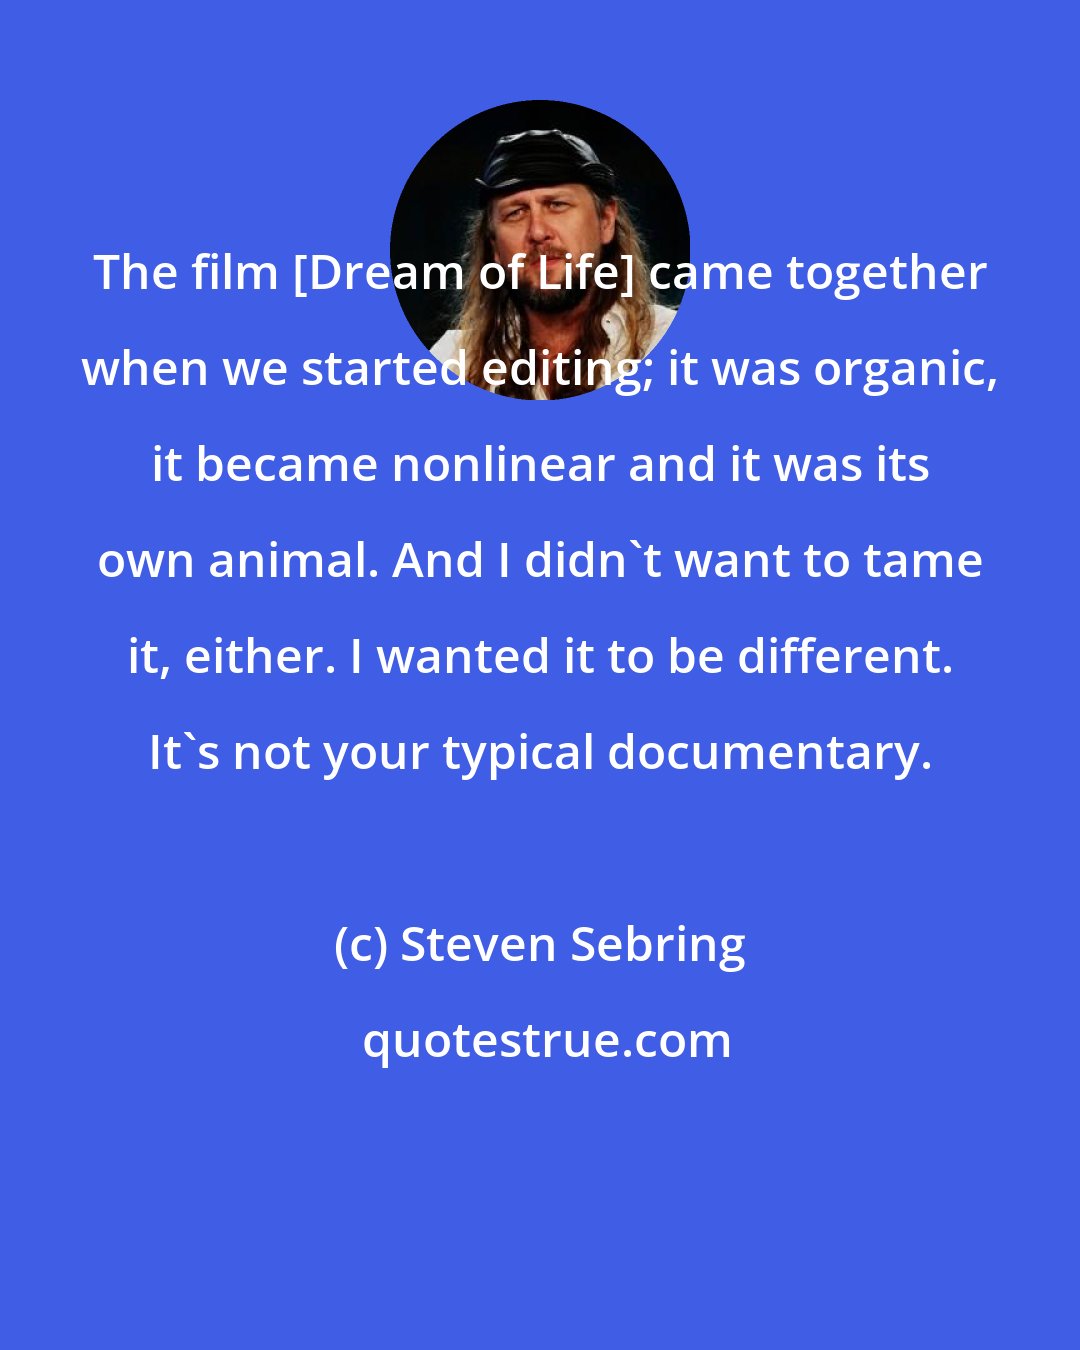 Steven Sebring: The film [Dream of Life] came together when we started editing; it was organic, it became nonlinear and it was its own animal. And I didn't want to tame it, either. I wanted it to be different. It's not your typical documentary.